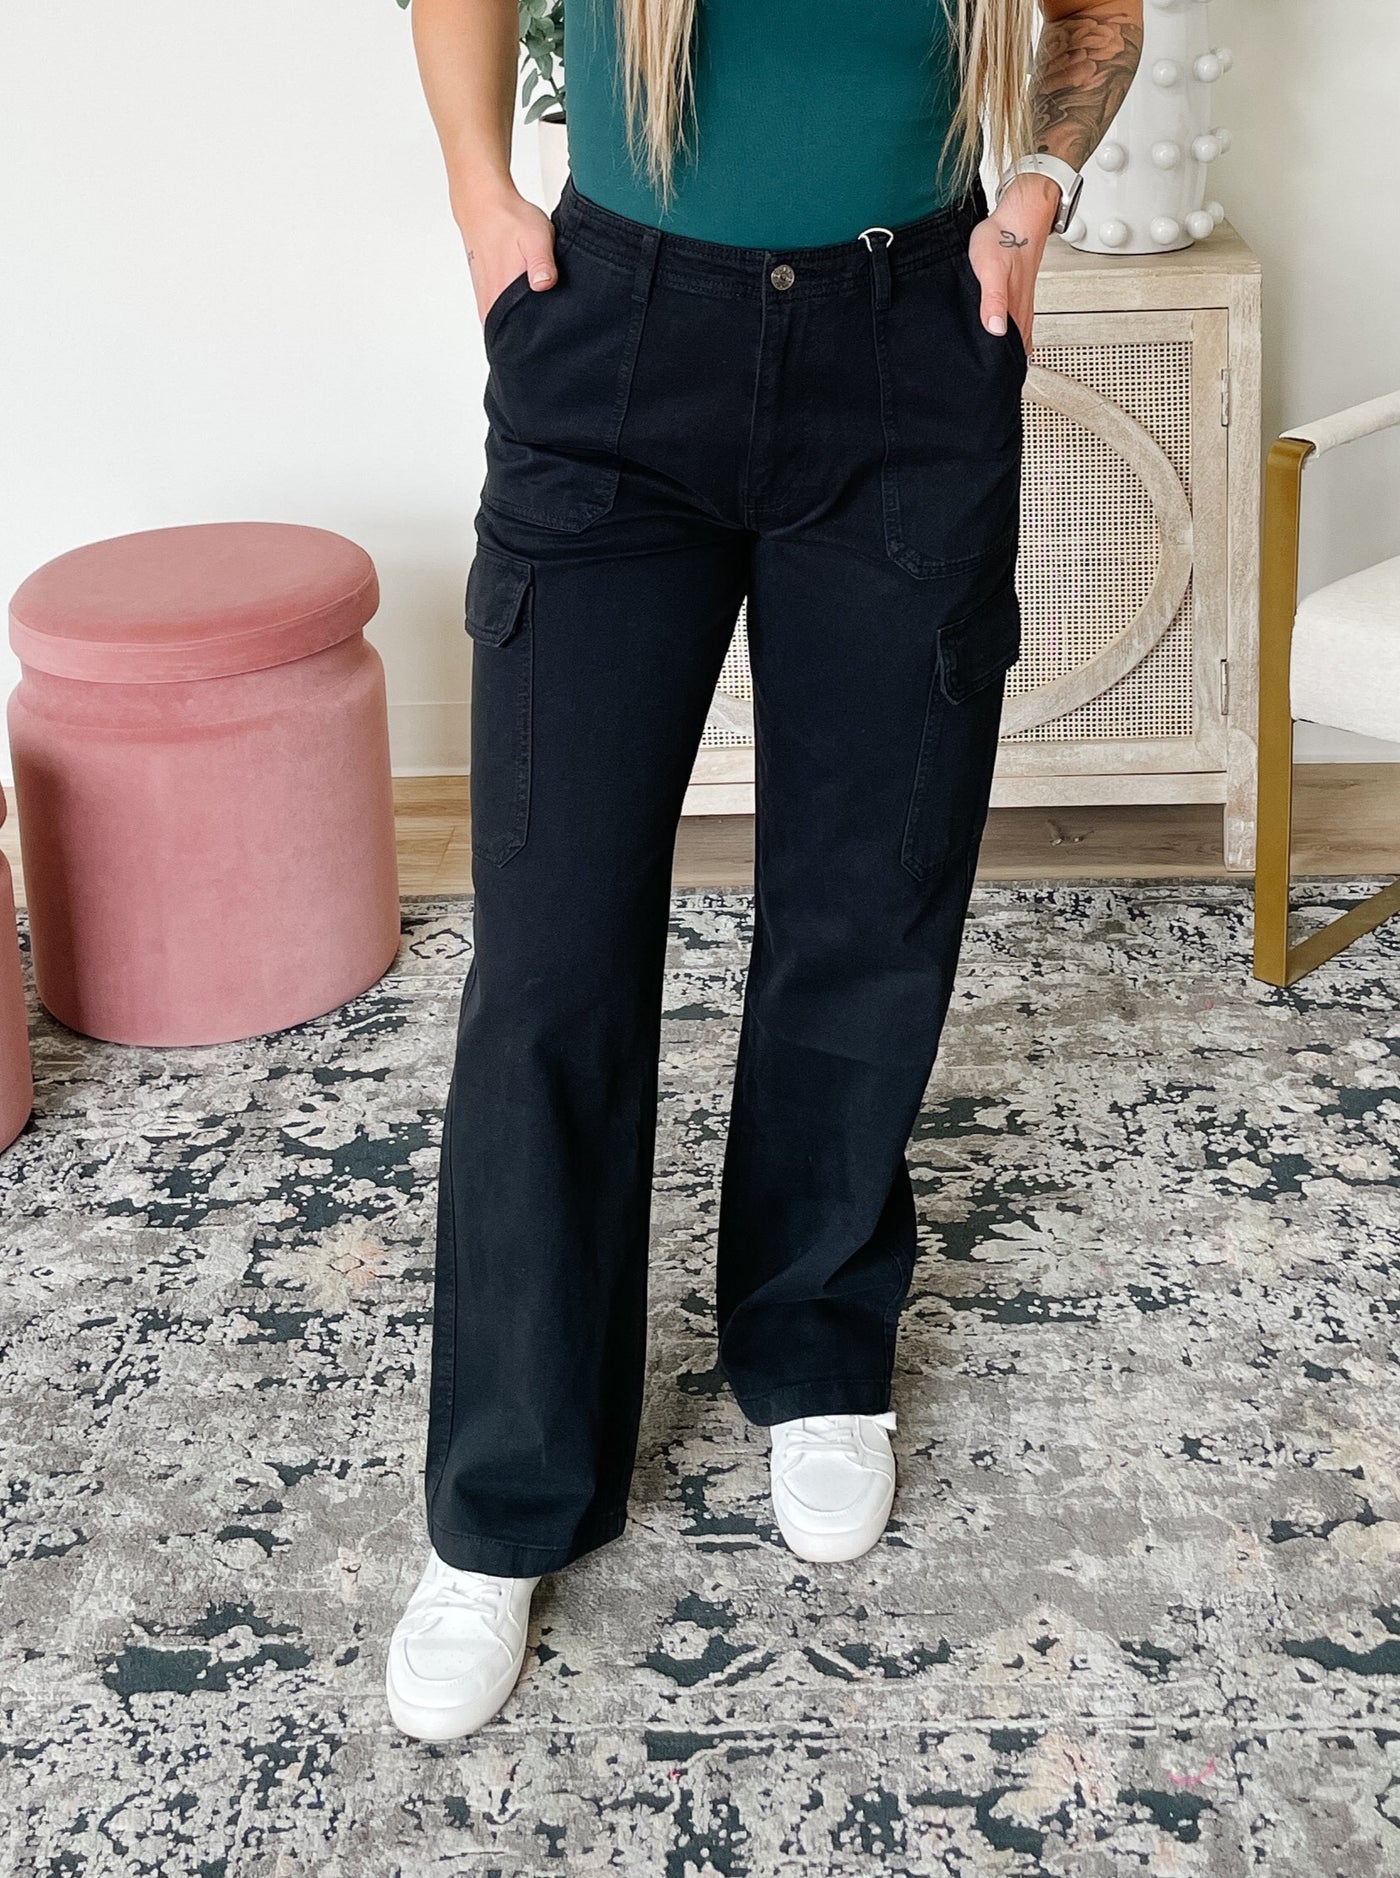 Malfy Cargo Pant in Black